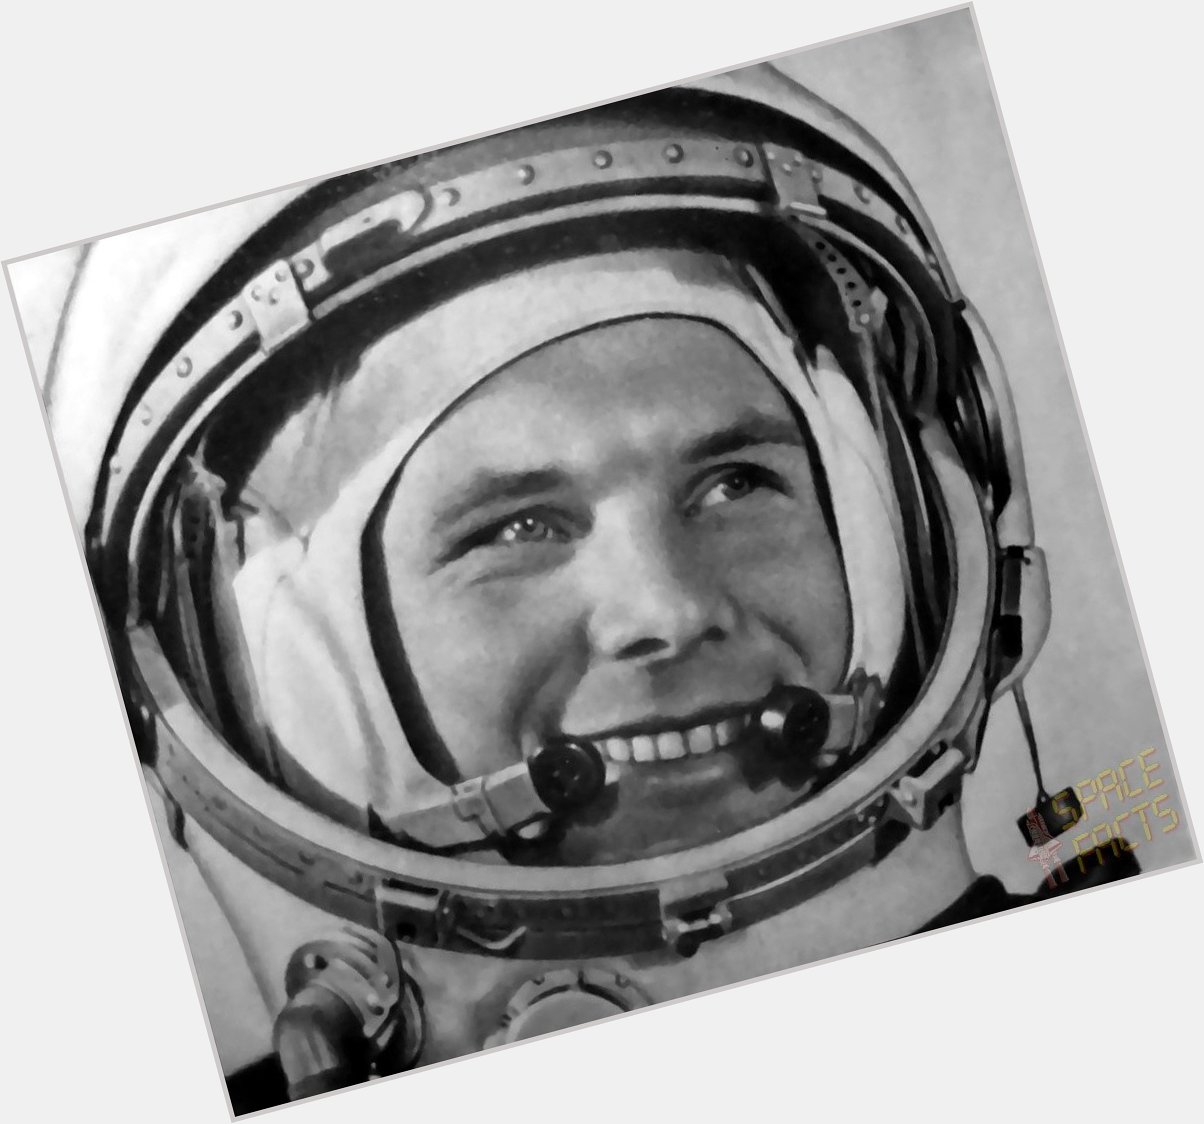 Yuri Gagarin.
First person in space.
He died at the age of 34 but would have turned 83 today.
Happy Birthday, Yuri! 